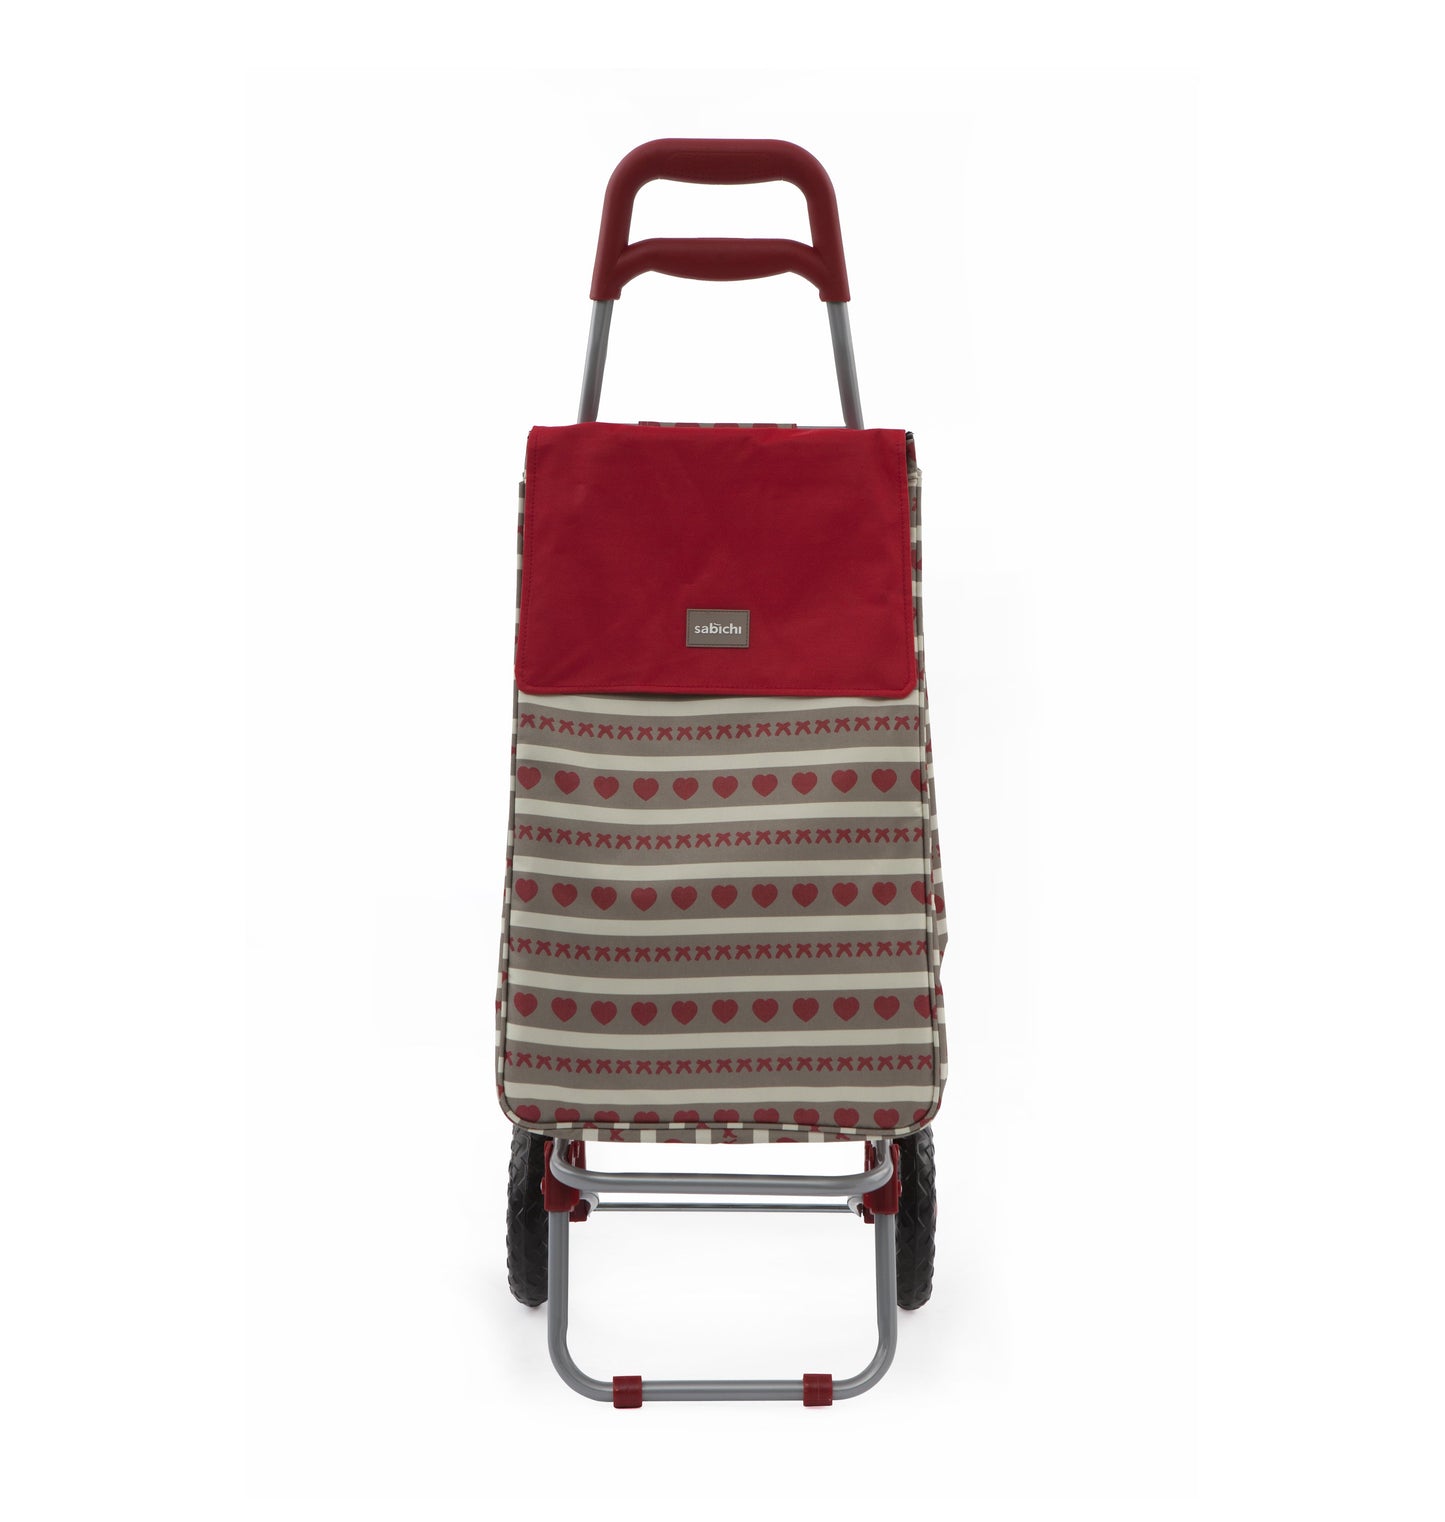 Home Bistro Shopping Trolley